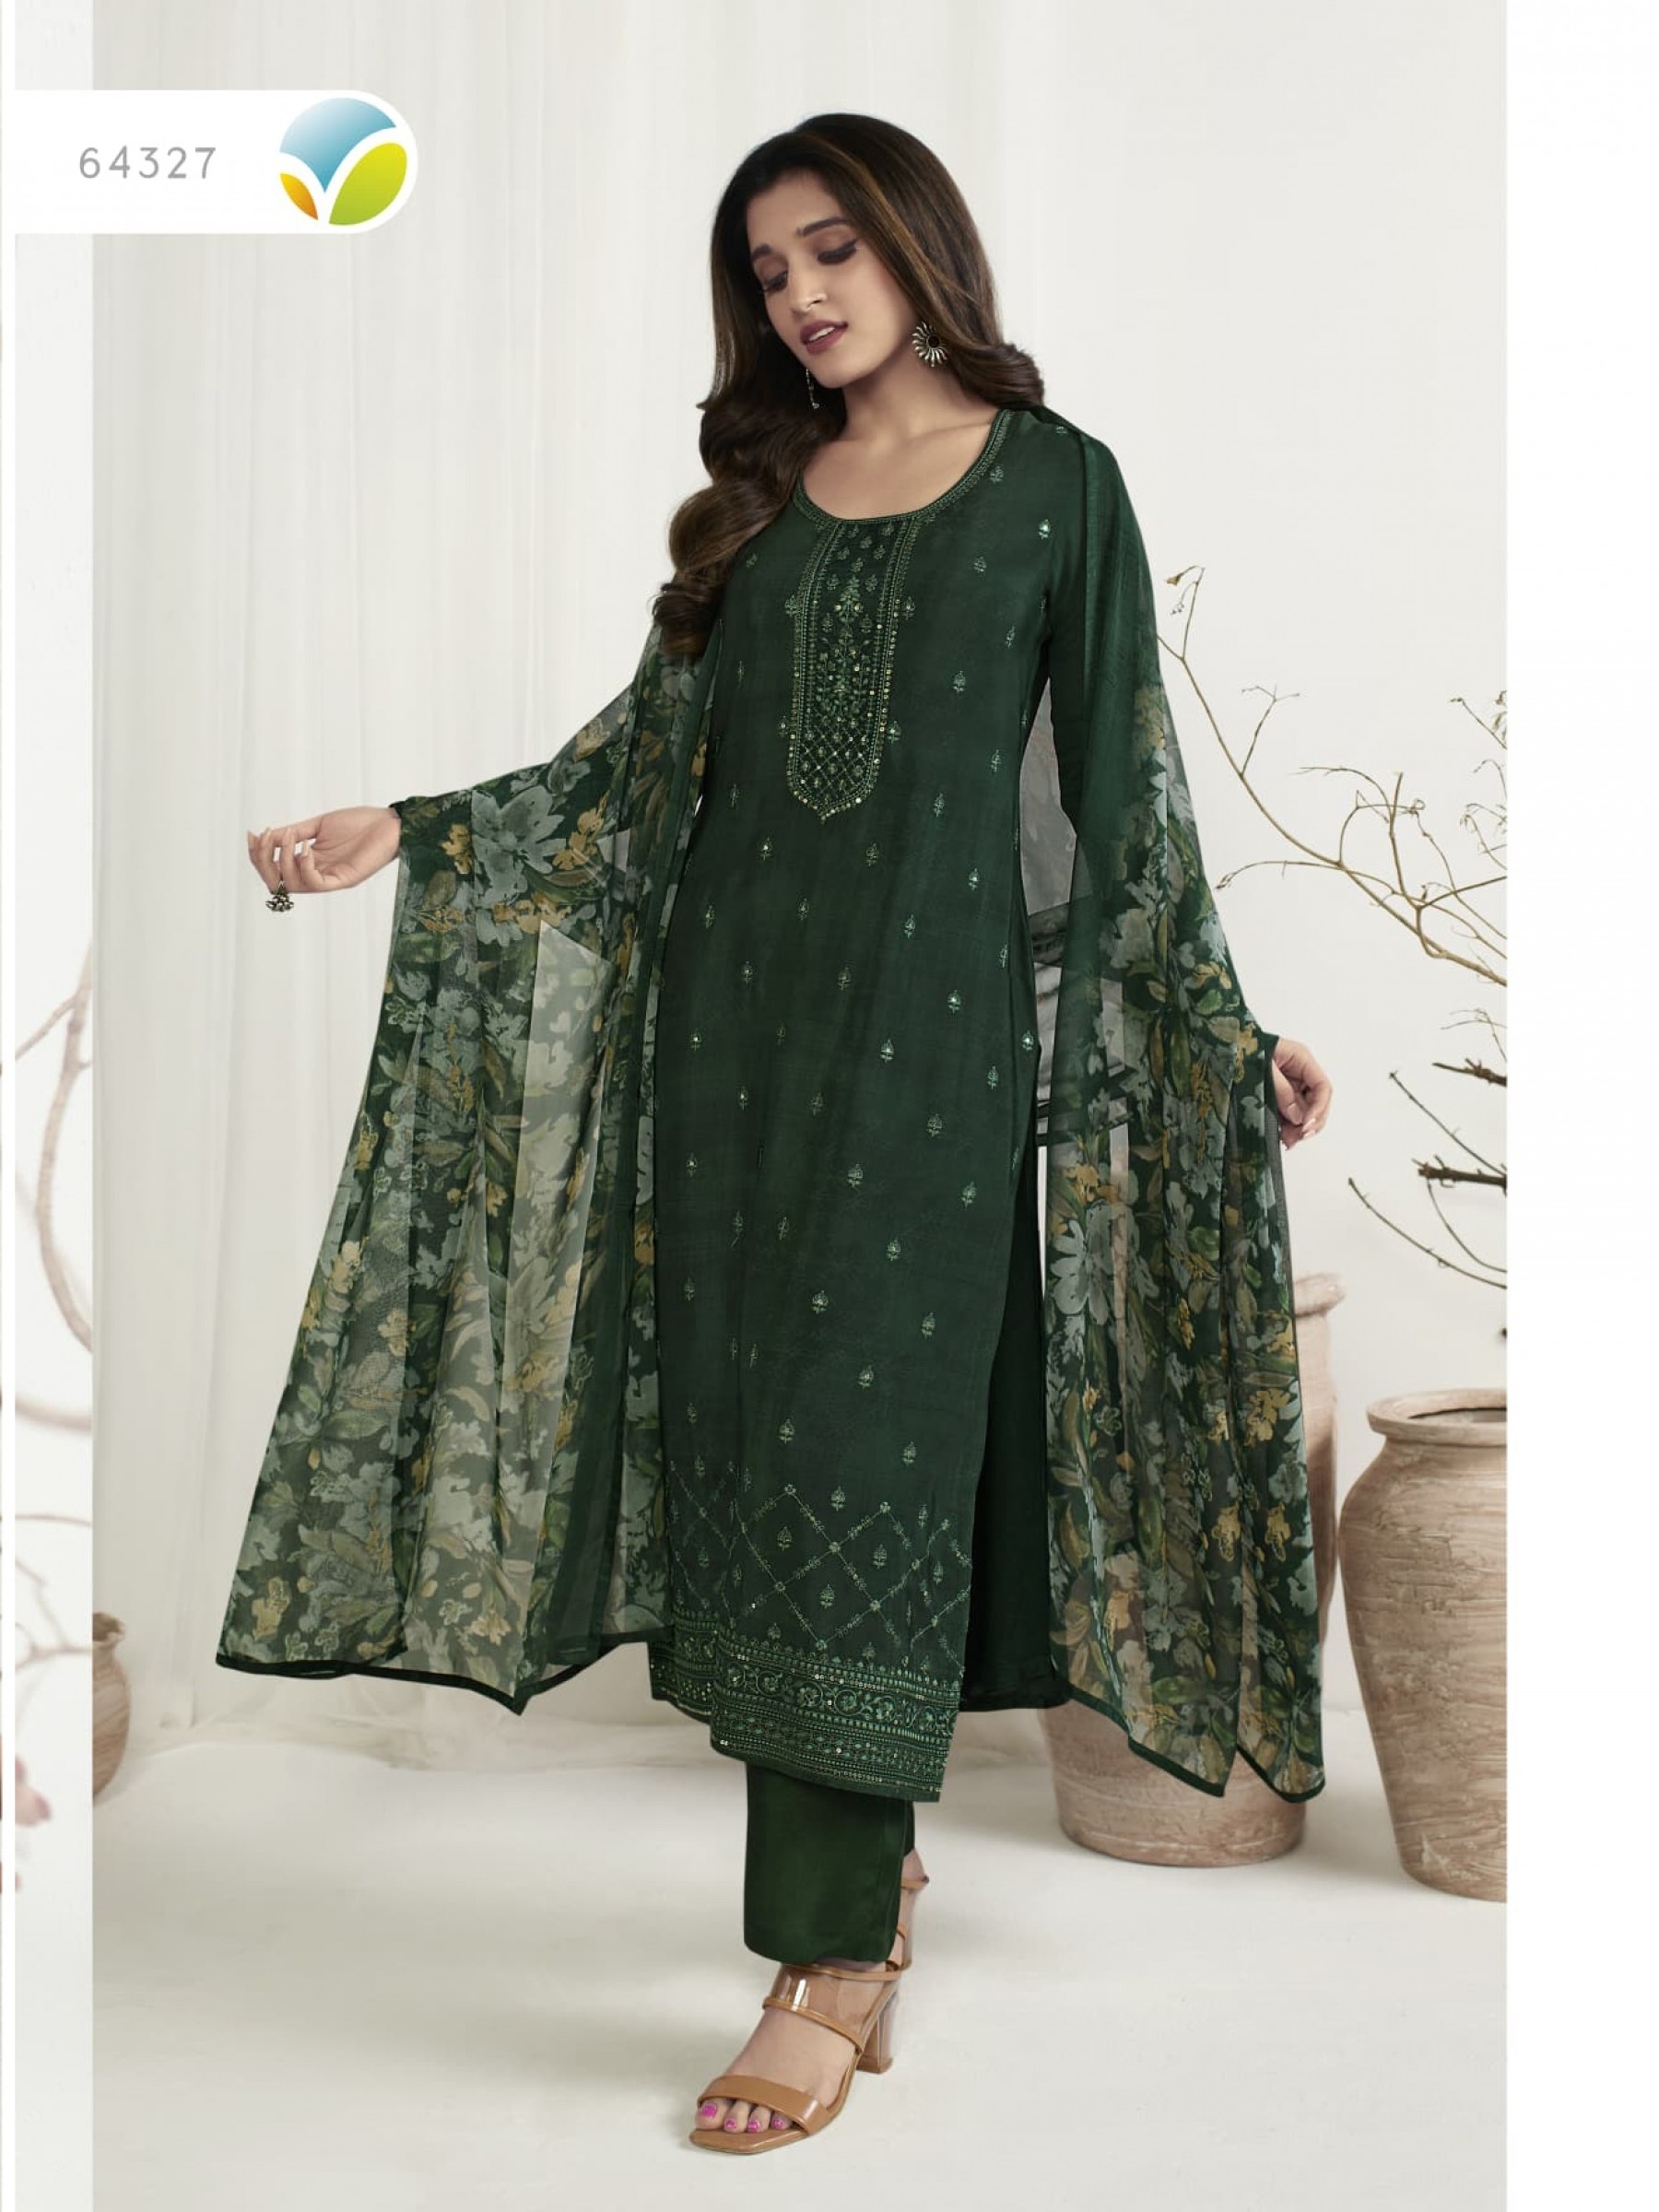 Soft Crape Party Wear  Suit in Green Color with  Embroidery Work